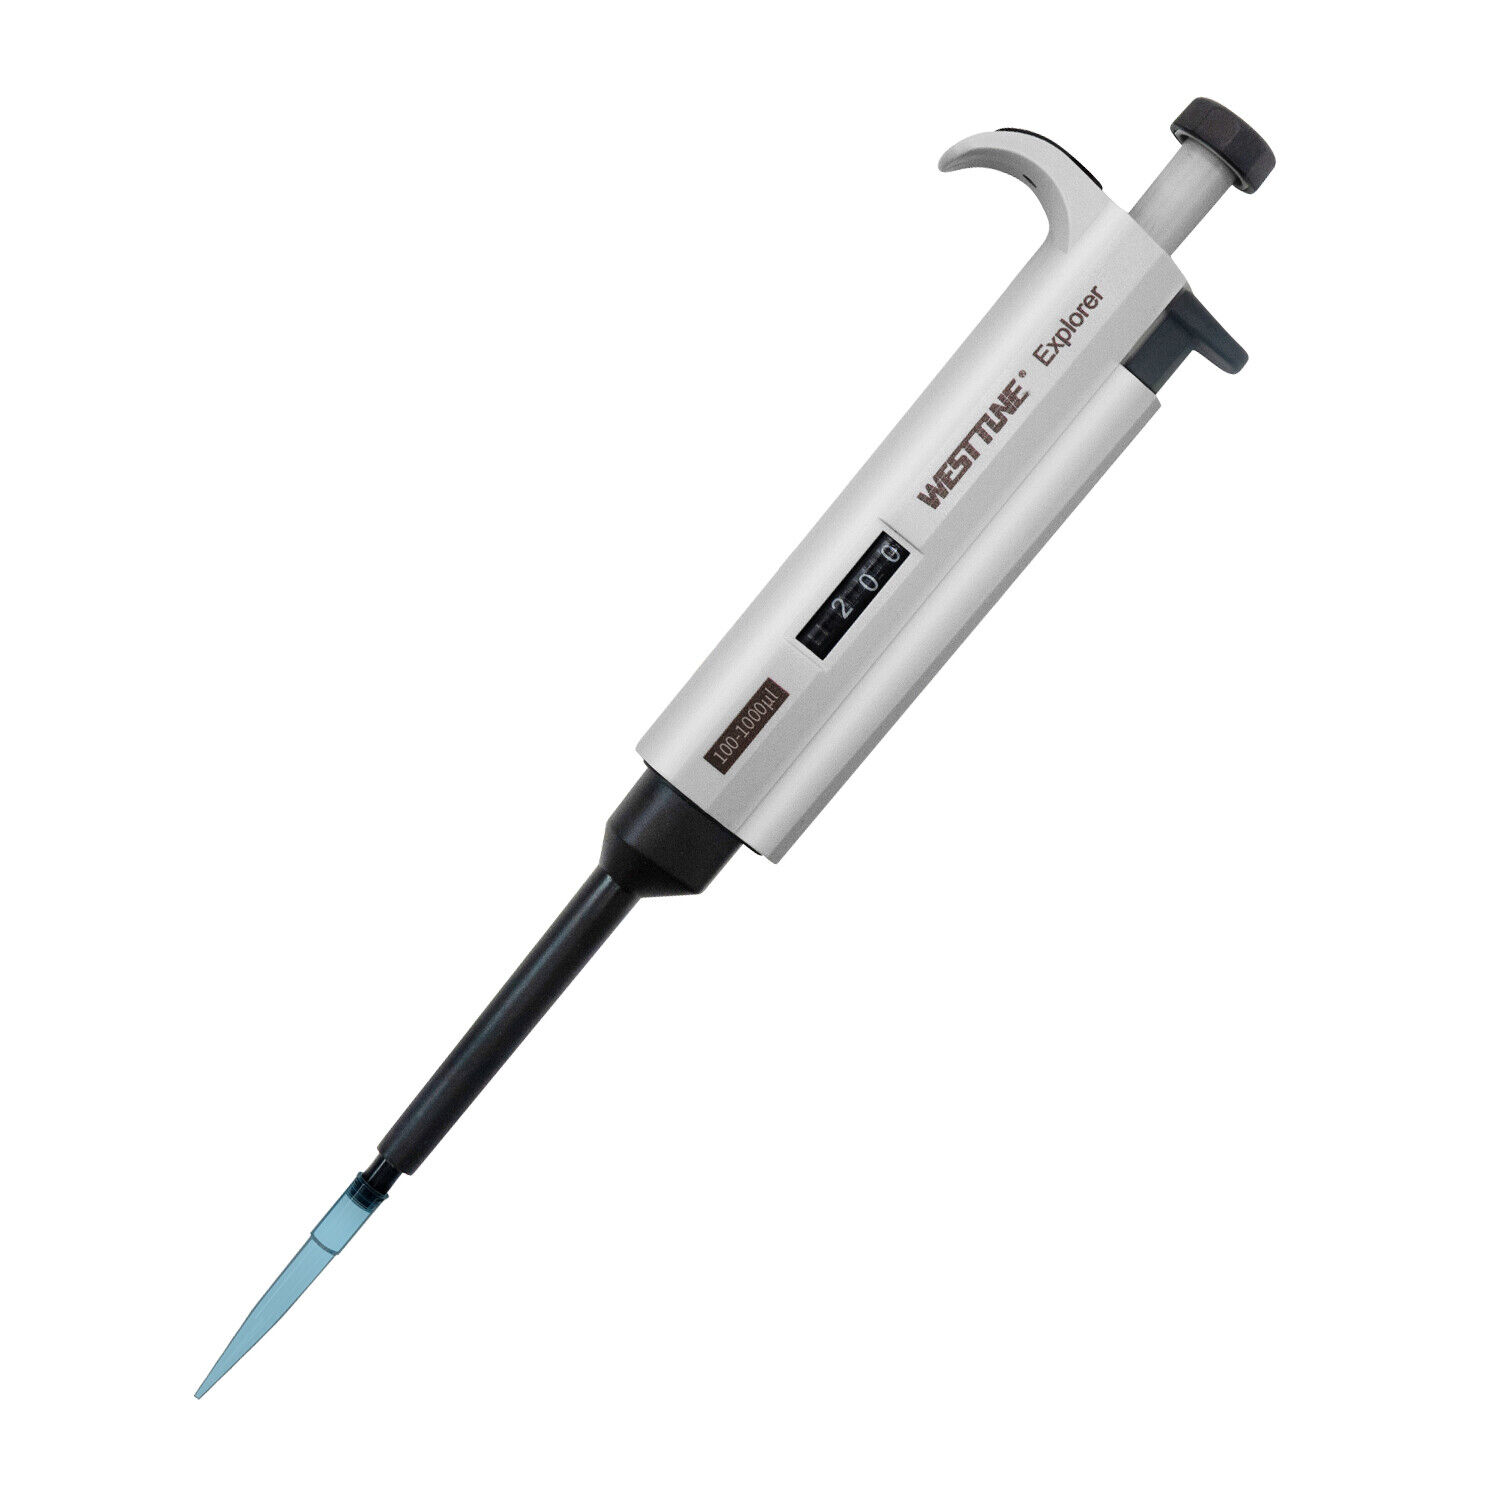 Lab Micropipette Adjustable Variable Volume Single Channel Pipette Pipettor